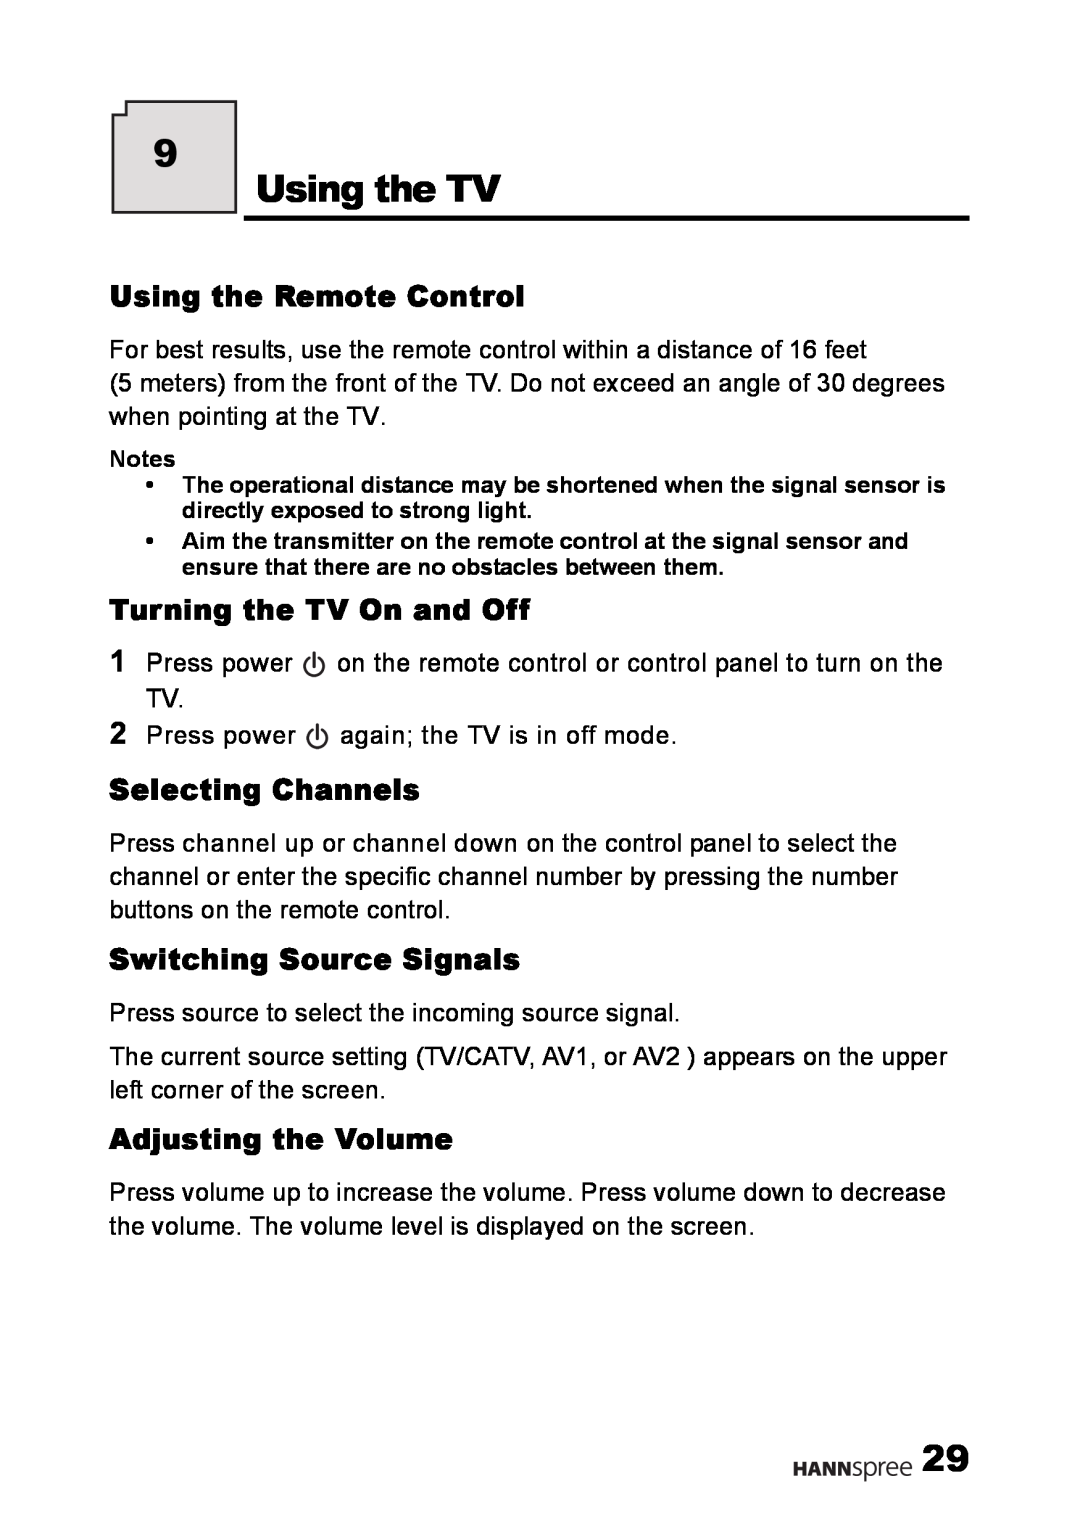 HANNspree LT02-12U1-000 user manual Using the TV, Using the Remote Control, Turning the TV On and Off, Selecting Channels 